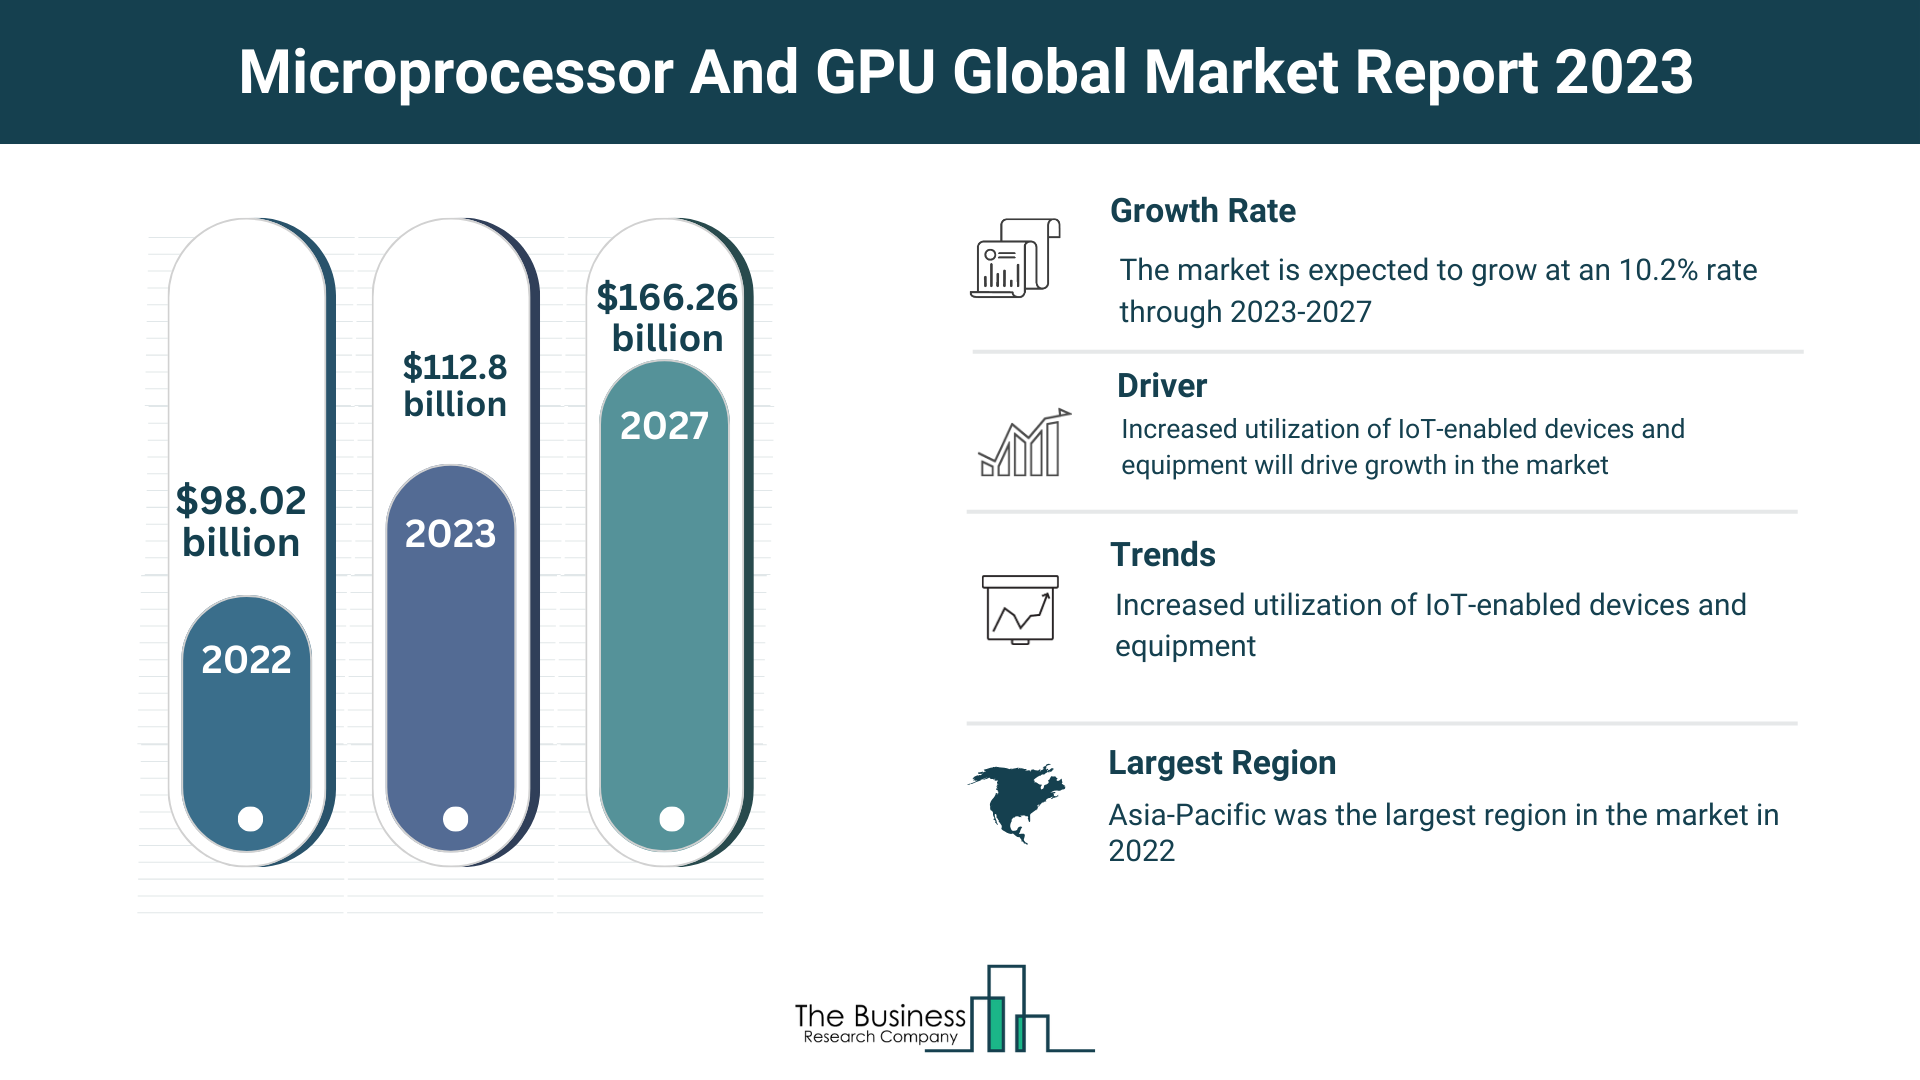 Insights Into The Microprocessor And GPU Market’s Growth Potential 2023-2032